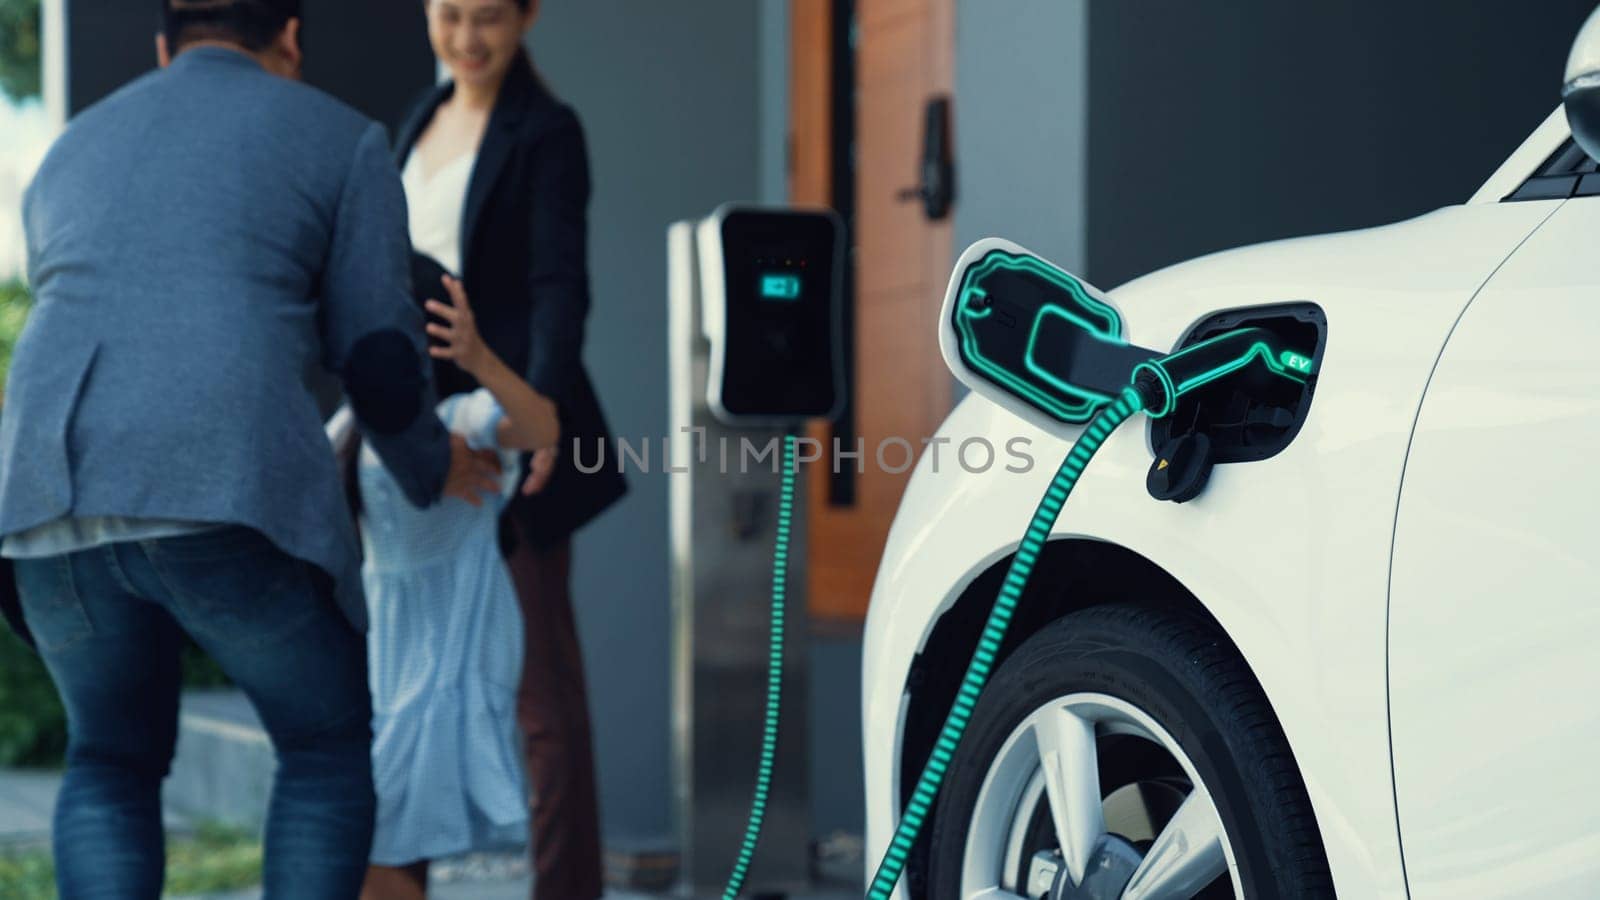 Modern family recharge electric car from home charging station. Peruse by biancoblue